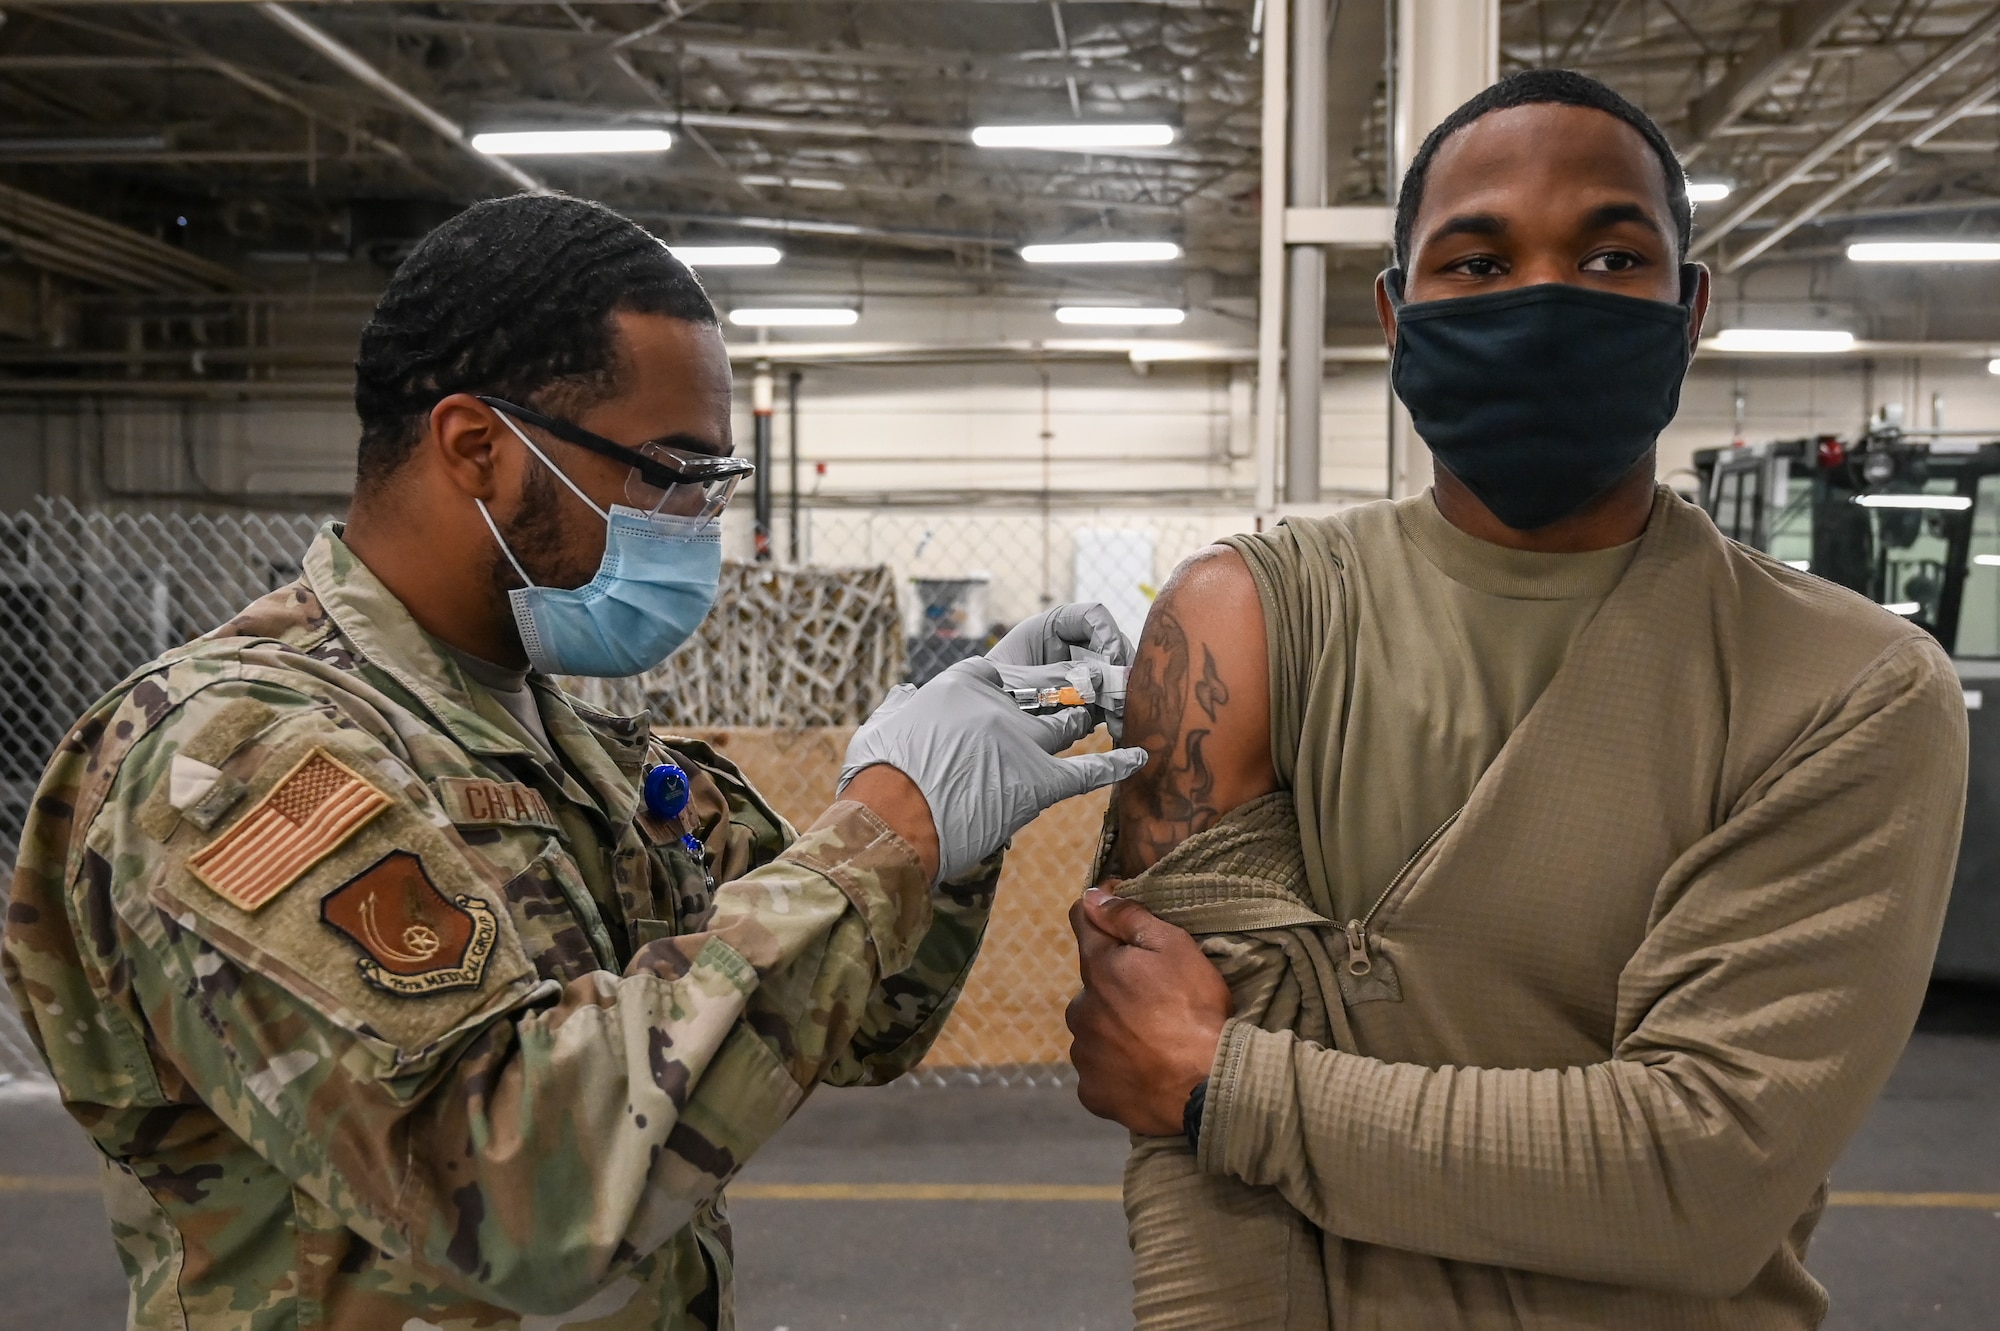 Tech. Sgt. Deshawn Scott, 75th Logistics Readiness Squadron, receives a flu vaccination shot Dec. 17, 2020, at Hill Air Force Base, Utah, from Airman 1st Class Carlos Cheatham, 75th Medical Group. The CDC recommends seasonal influenza vaccine for all people 6 months of age and older. The best way to prevent seasonal flu is to get vaccinated every year. (U.S. Air Force photo by Cynthia Griggs)